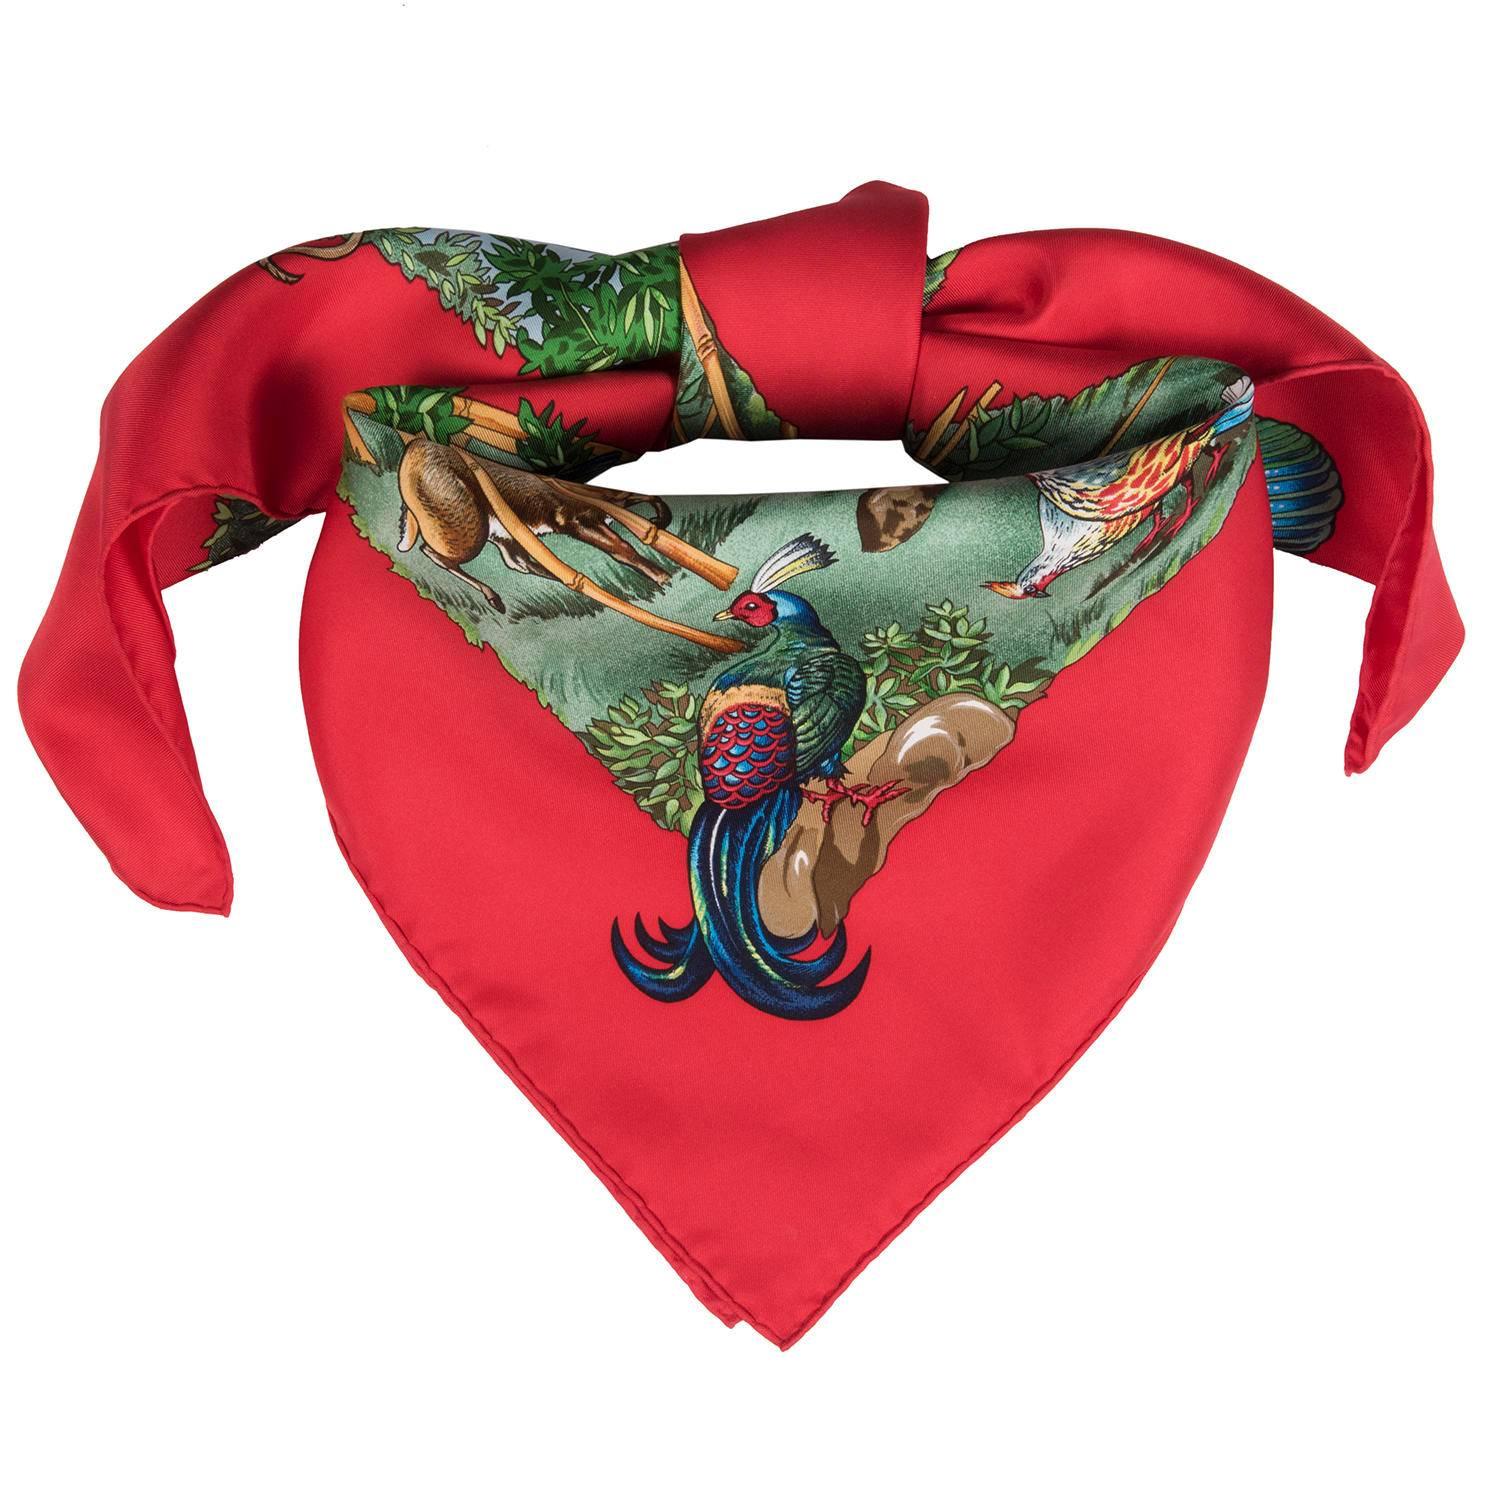 This Beautiful Hermes Vintage Scarf was designed in 1995 by Hermes famous 'House' Designer Robert Dallet. In pristine condition and retaining it's original wonderful rich colours the Scarf comes with it's Hermes original sleeve packaging.